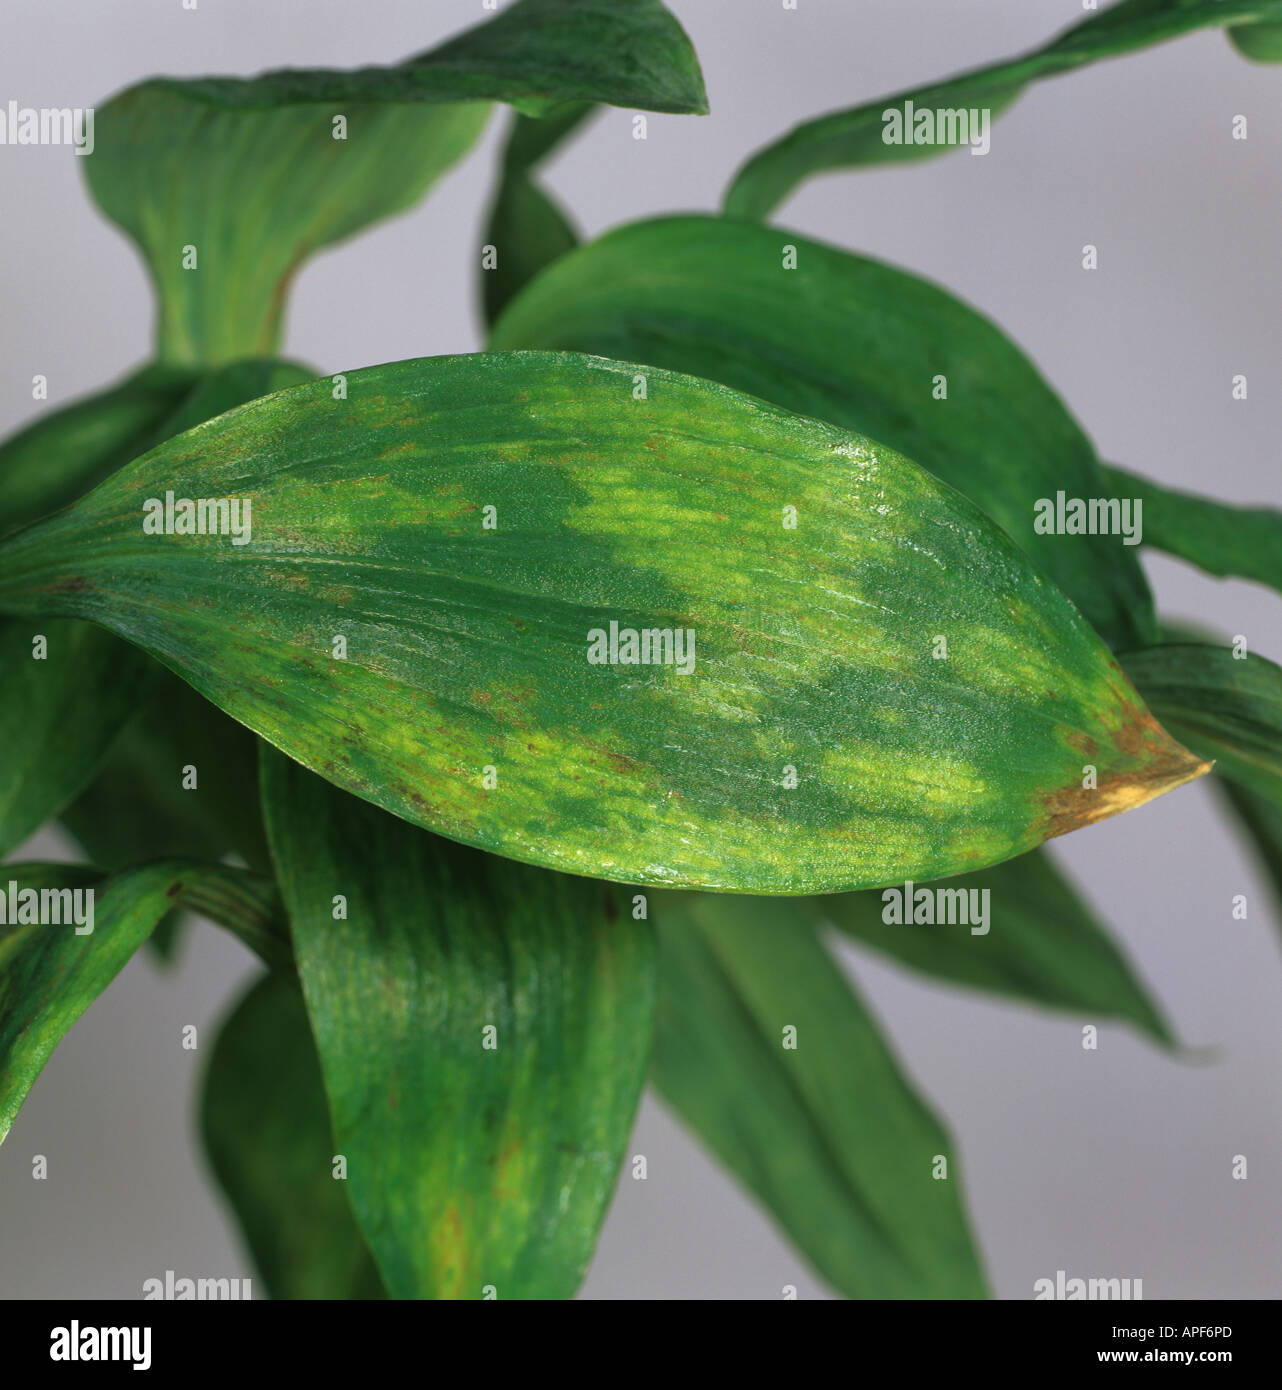 Peruvian lily Alstroemeria spp with tomato spotted wilt virus symptoms on the leaves Stock Photo